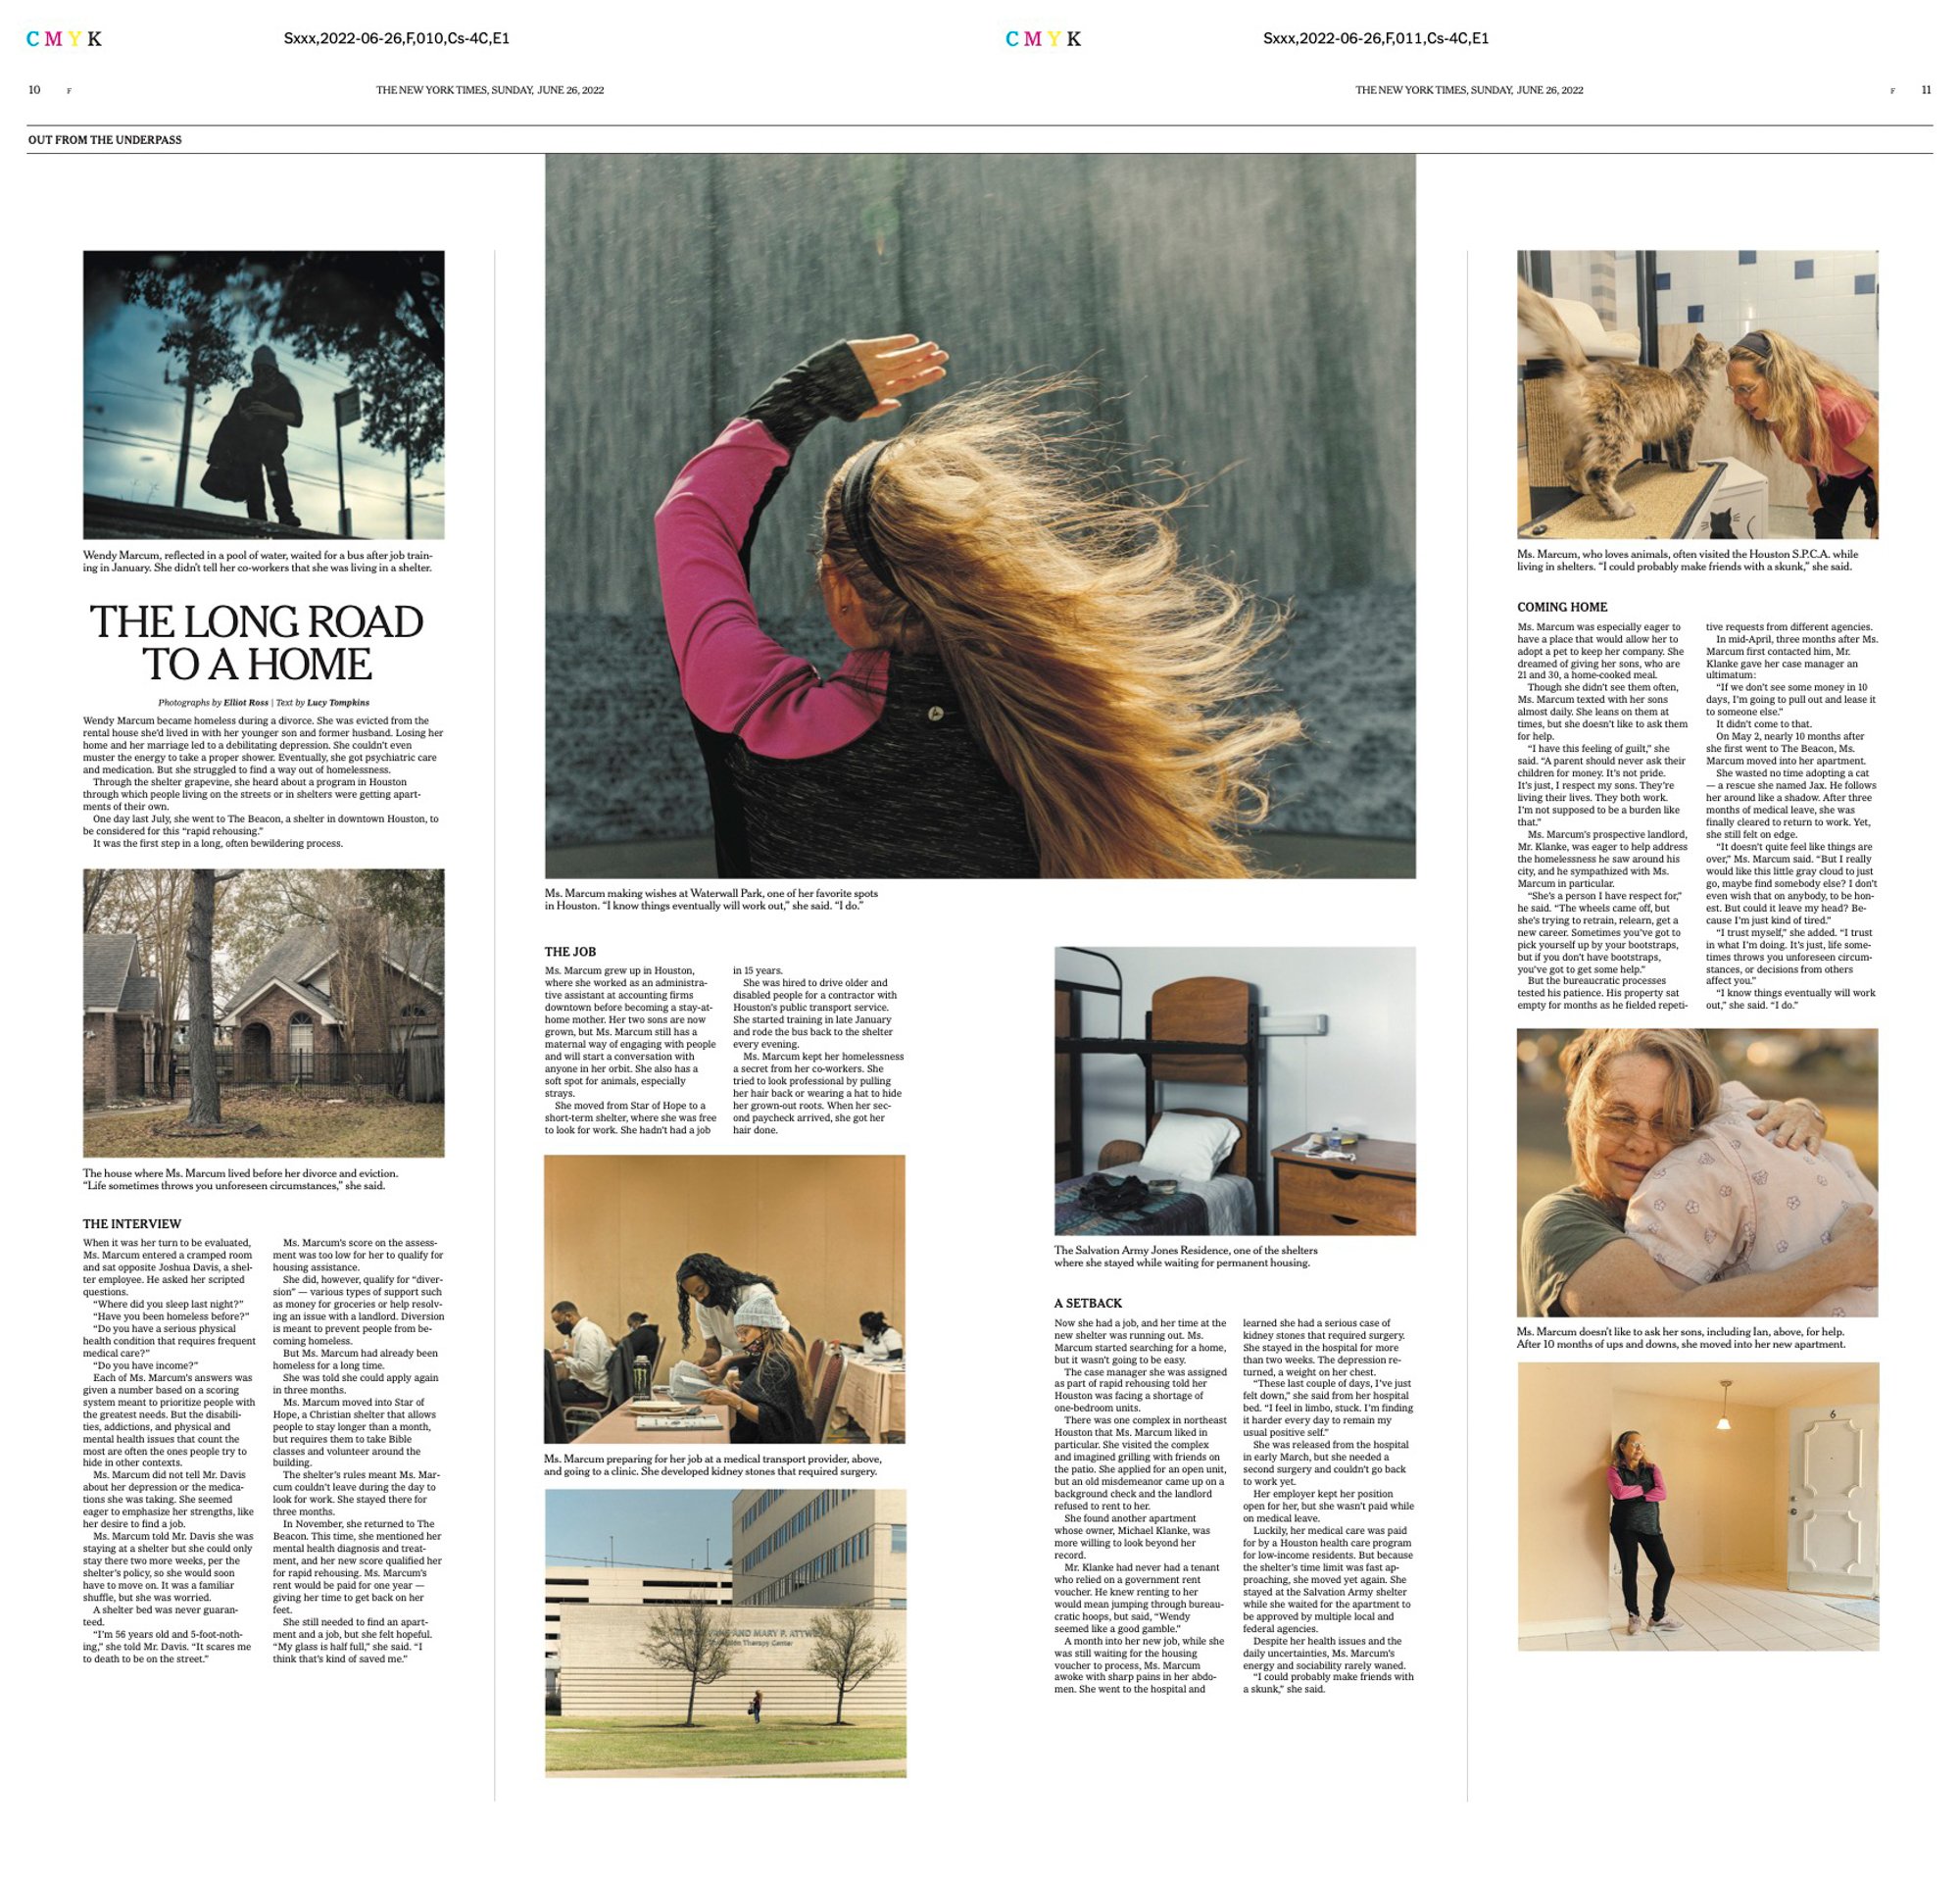 New York Times, from the story A Long Road to a Home as part of the NYT Headway Initiative. Published in the June 26, 2022 Sunday Times.  photo editor: Eve Lyons  writer: Lucy Tompkins